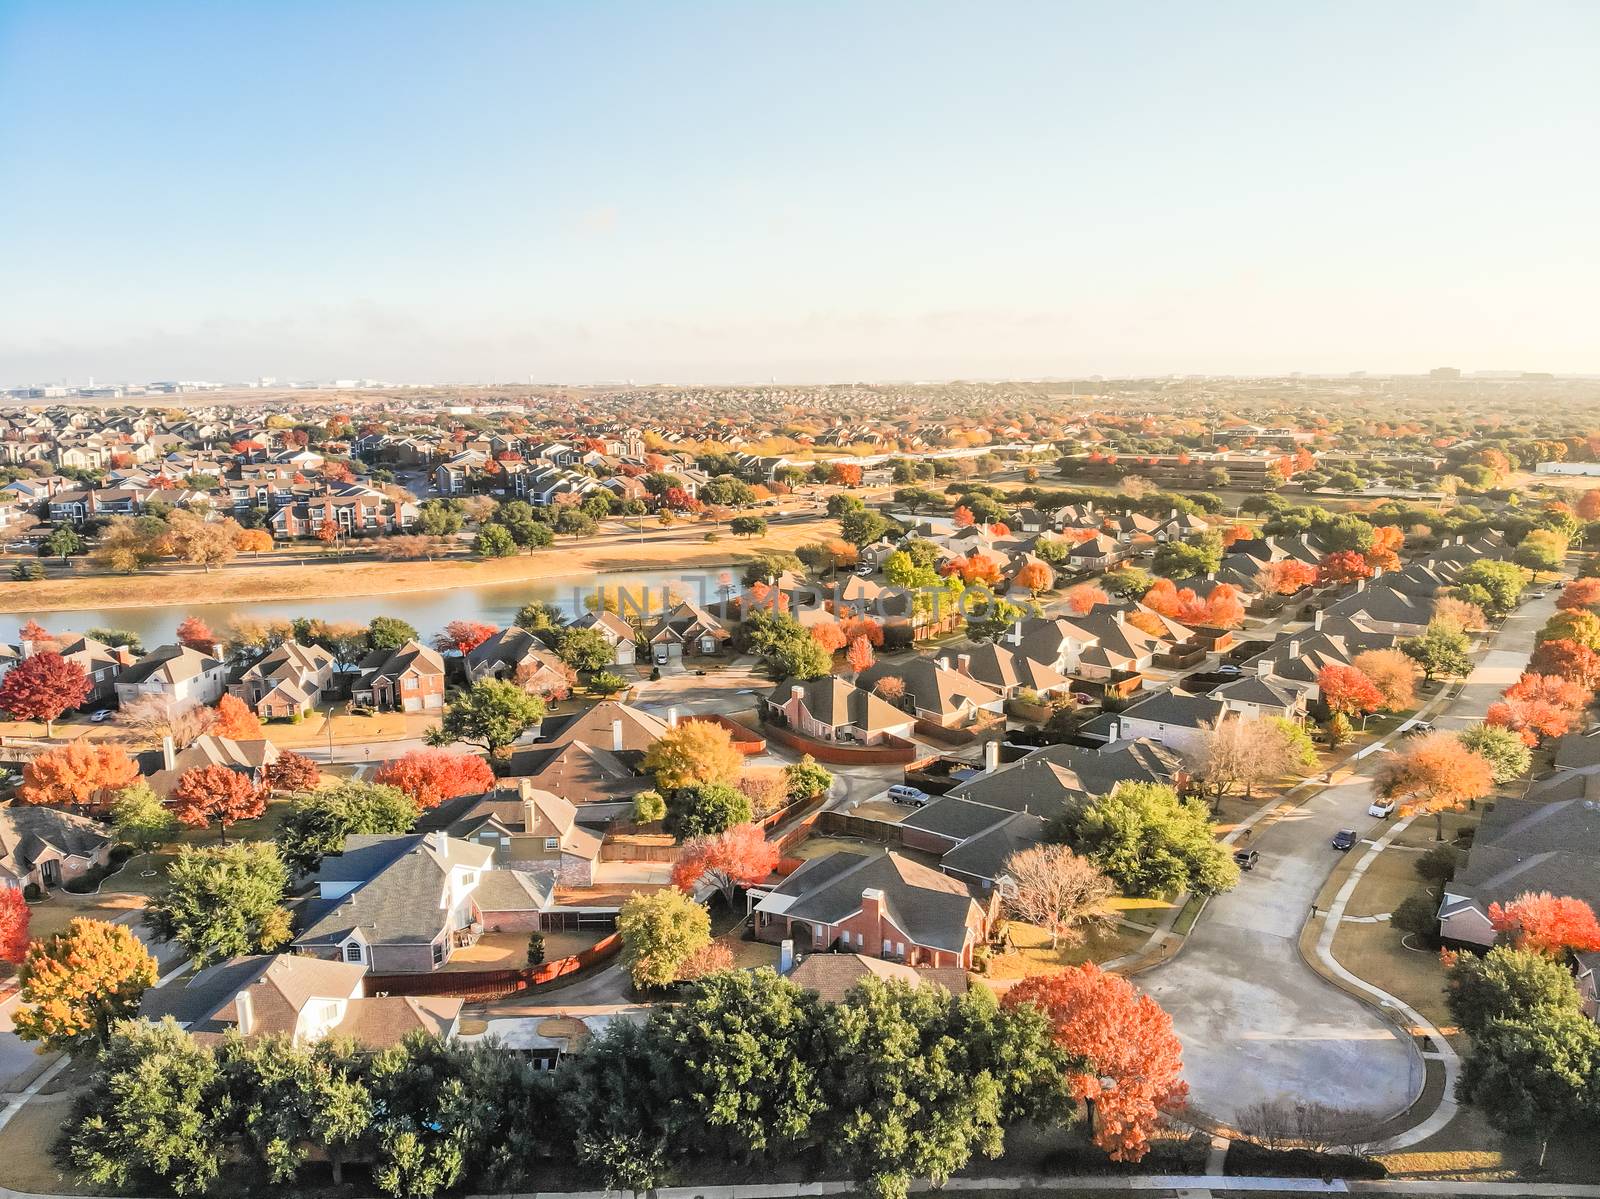 Top view sprawl subdivision with cul-de-sac street and colorful  by trongnguyen